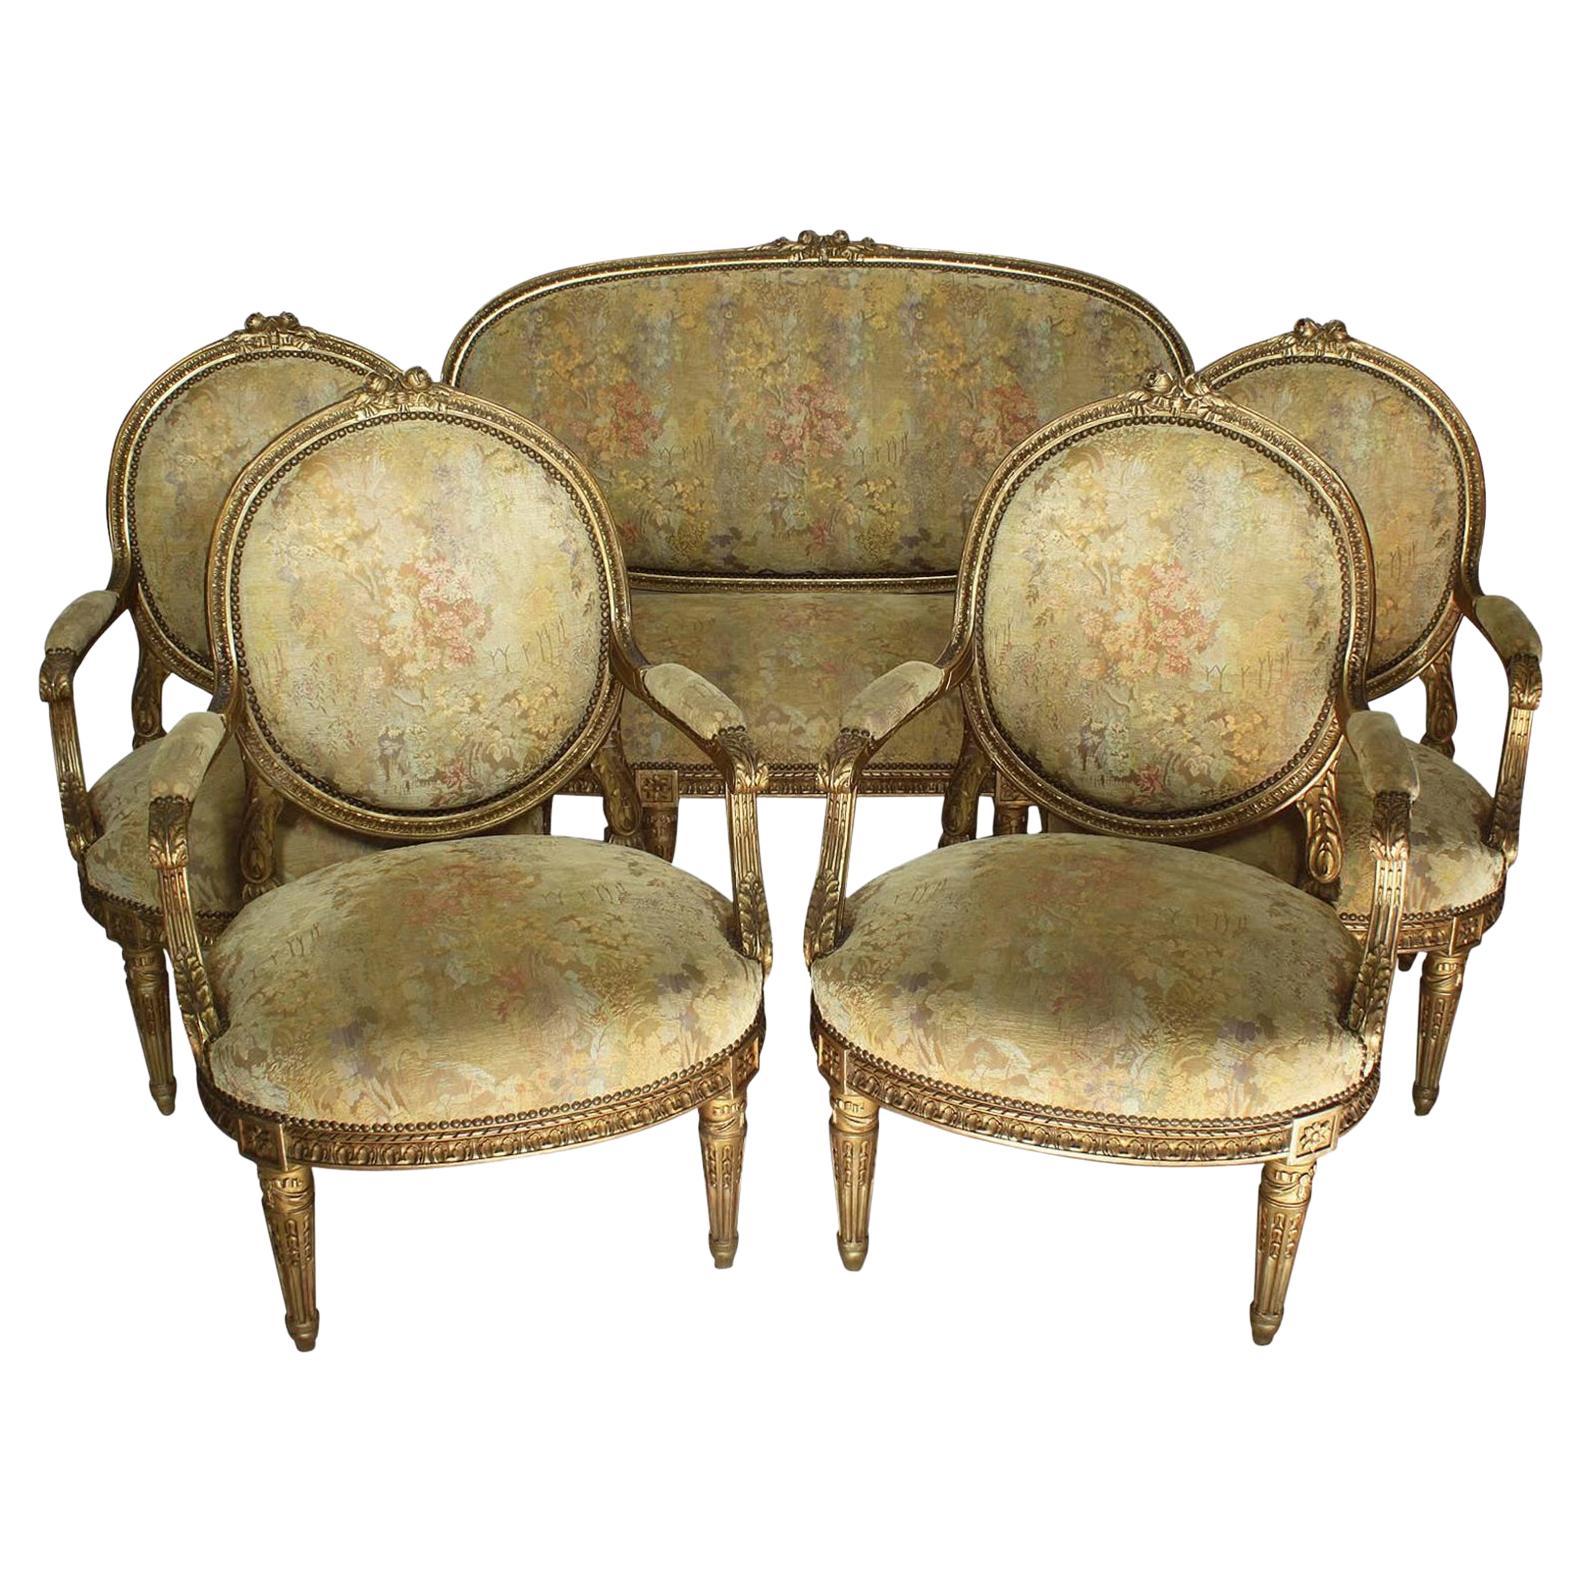 Fine French 19th Century Louis XVI Style Giltwood Carved Five-Piece Salon Suite For Sale